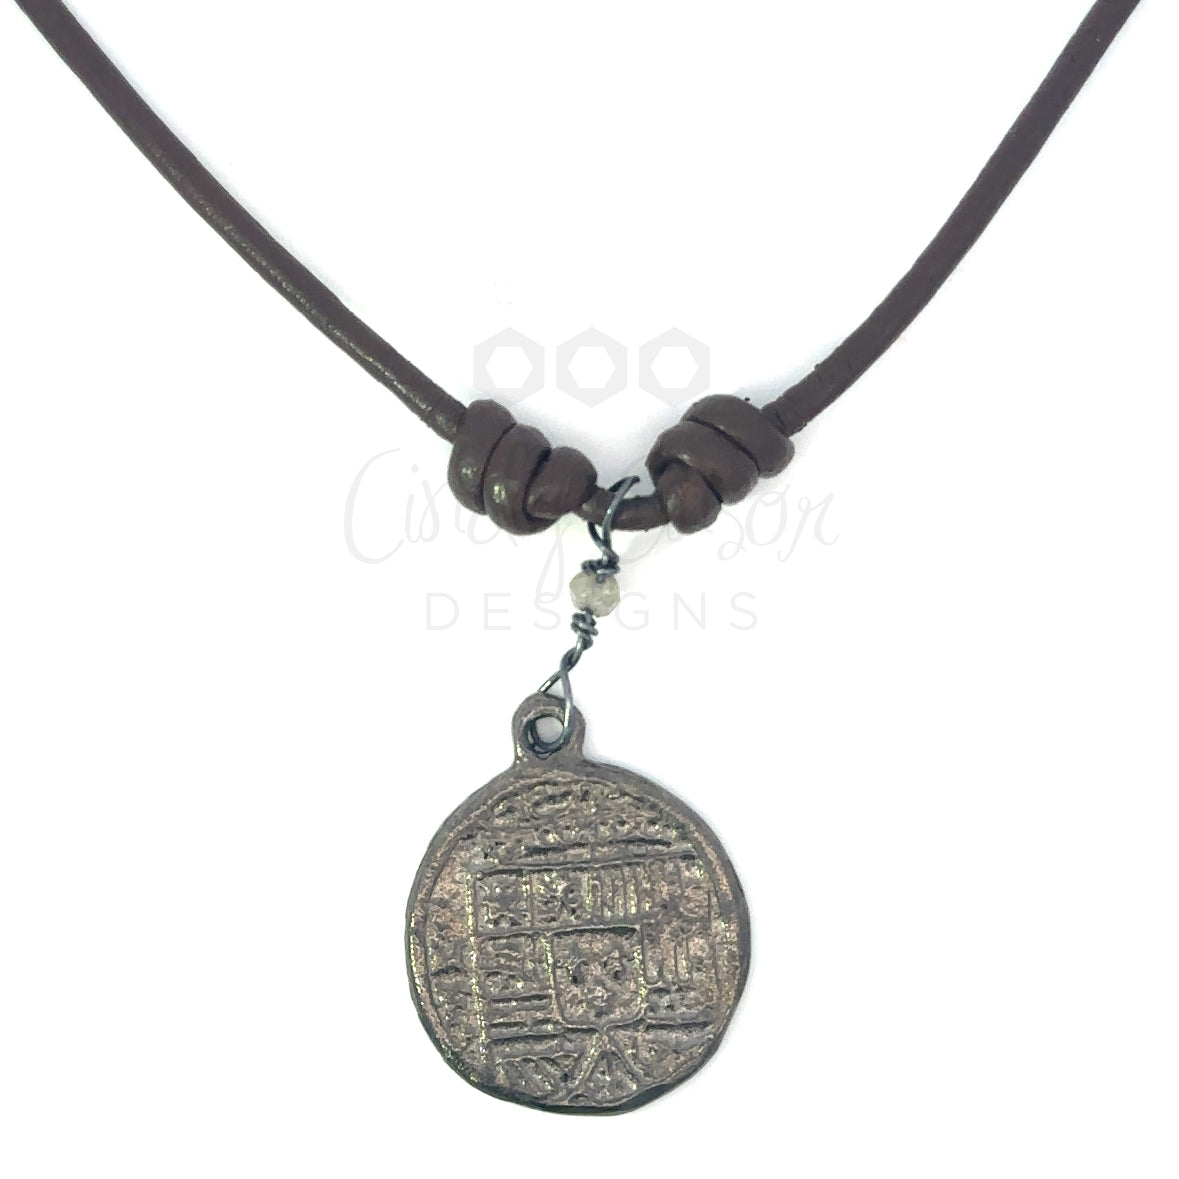 Short Leather Necklace with Spanish Coin